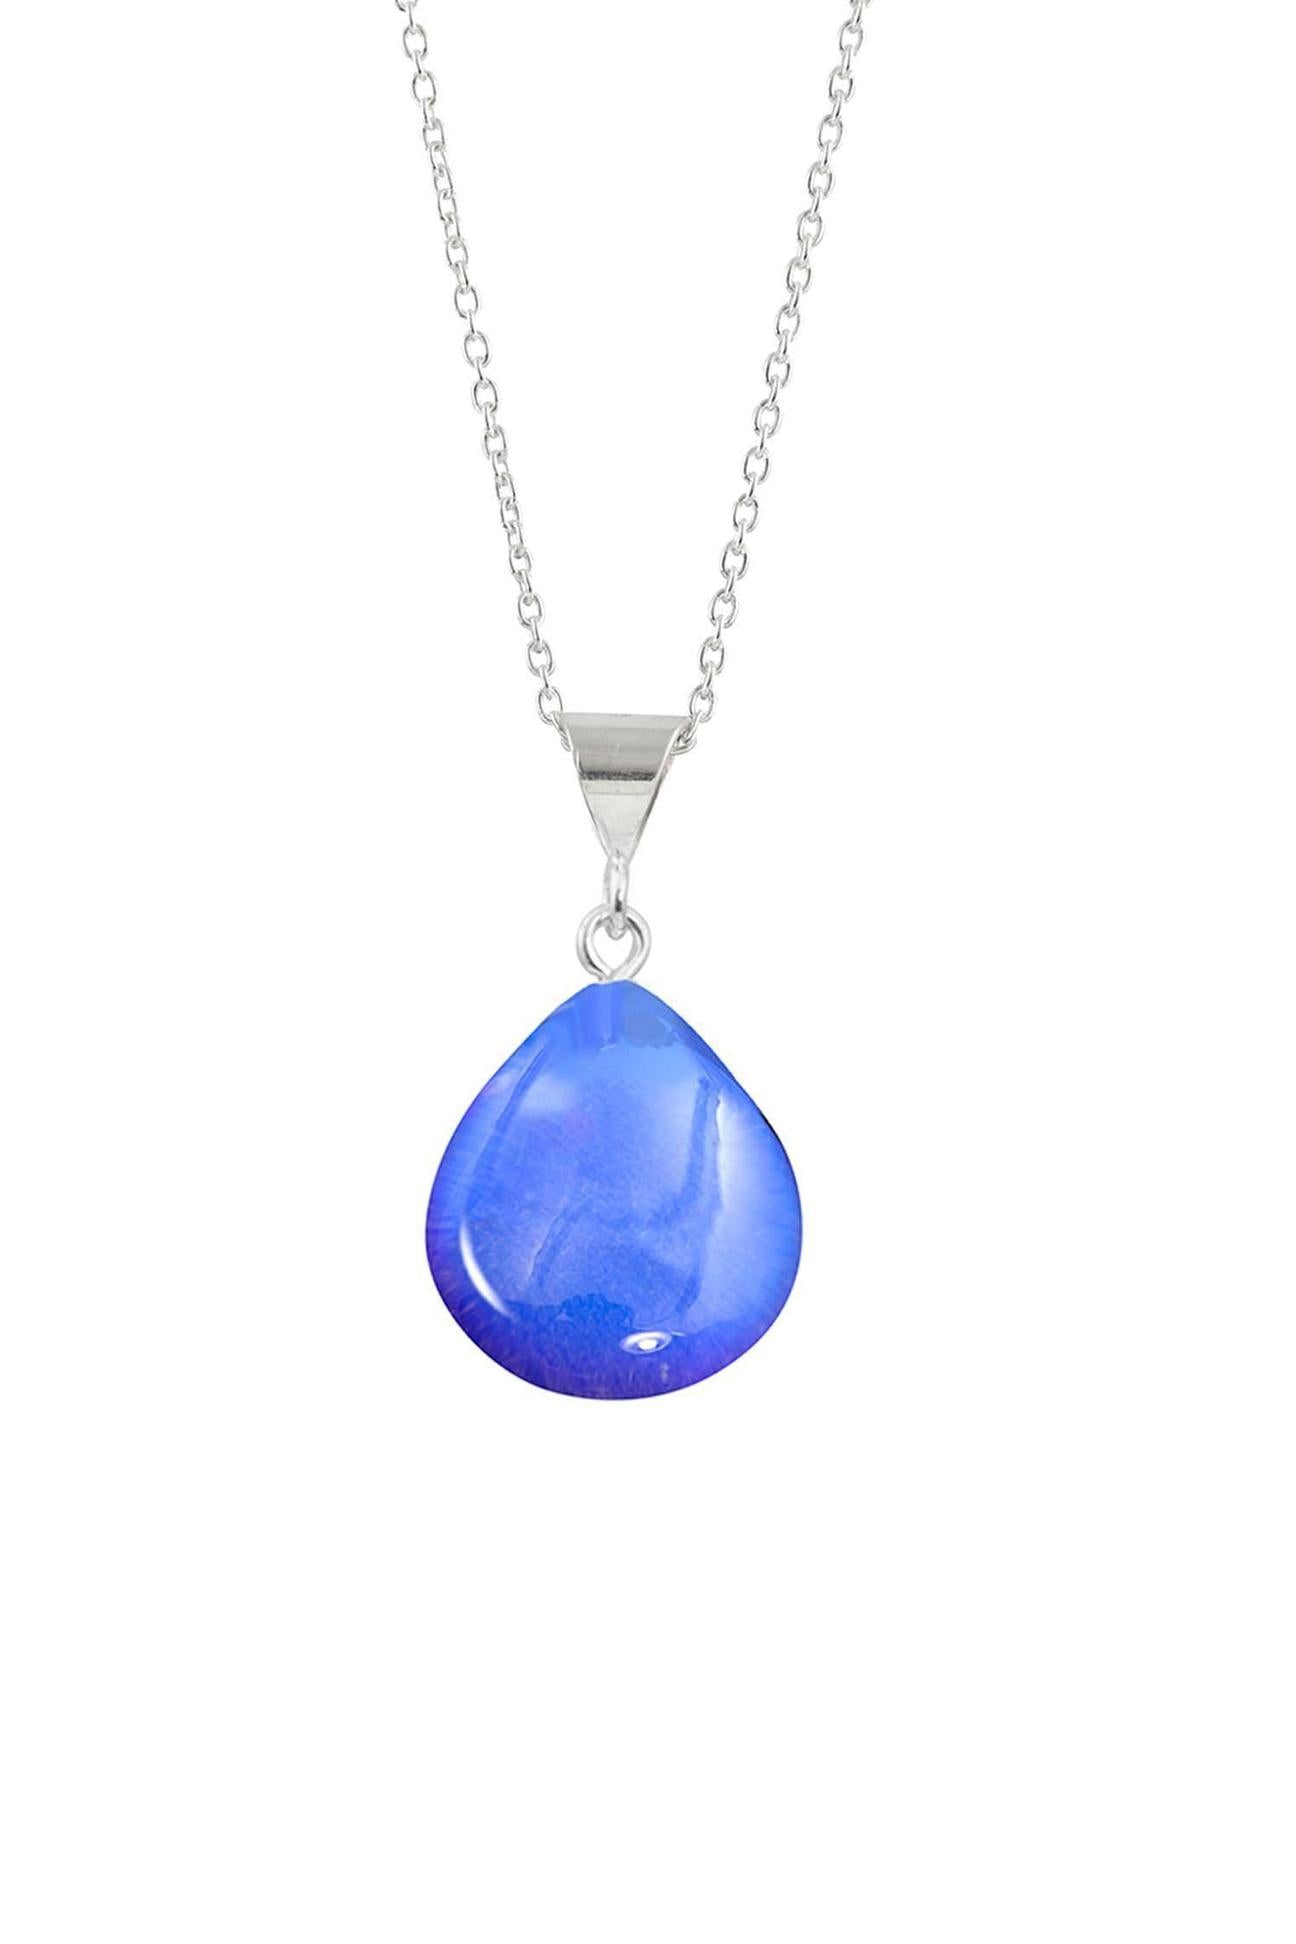 Leightworks X-small Drop Pendant